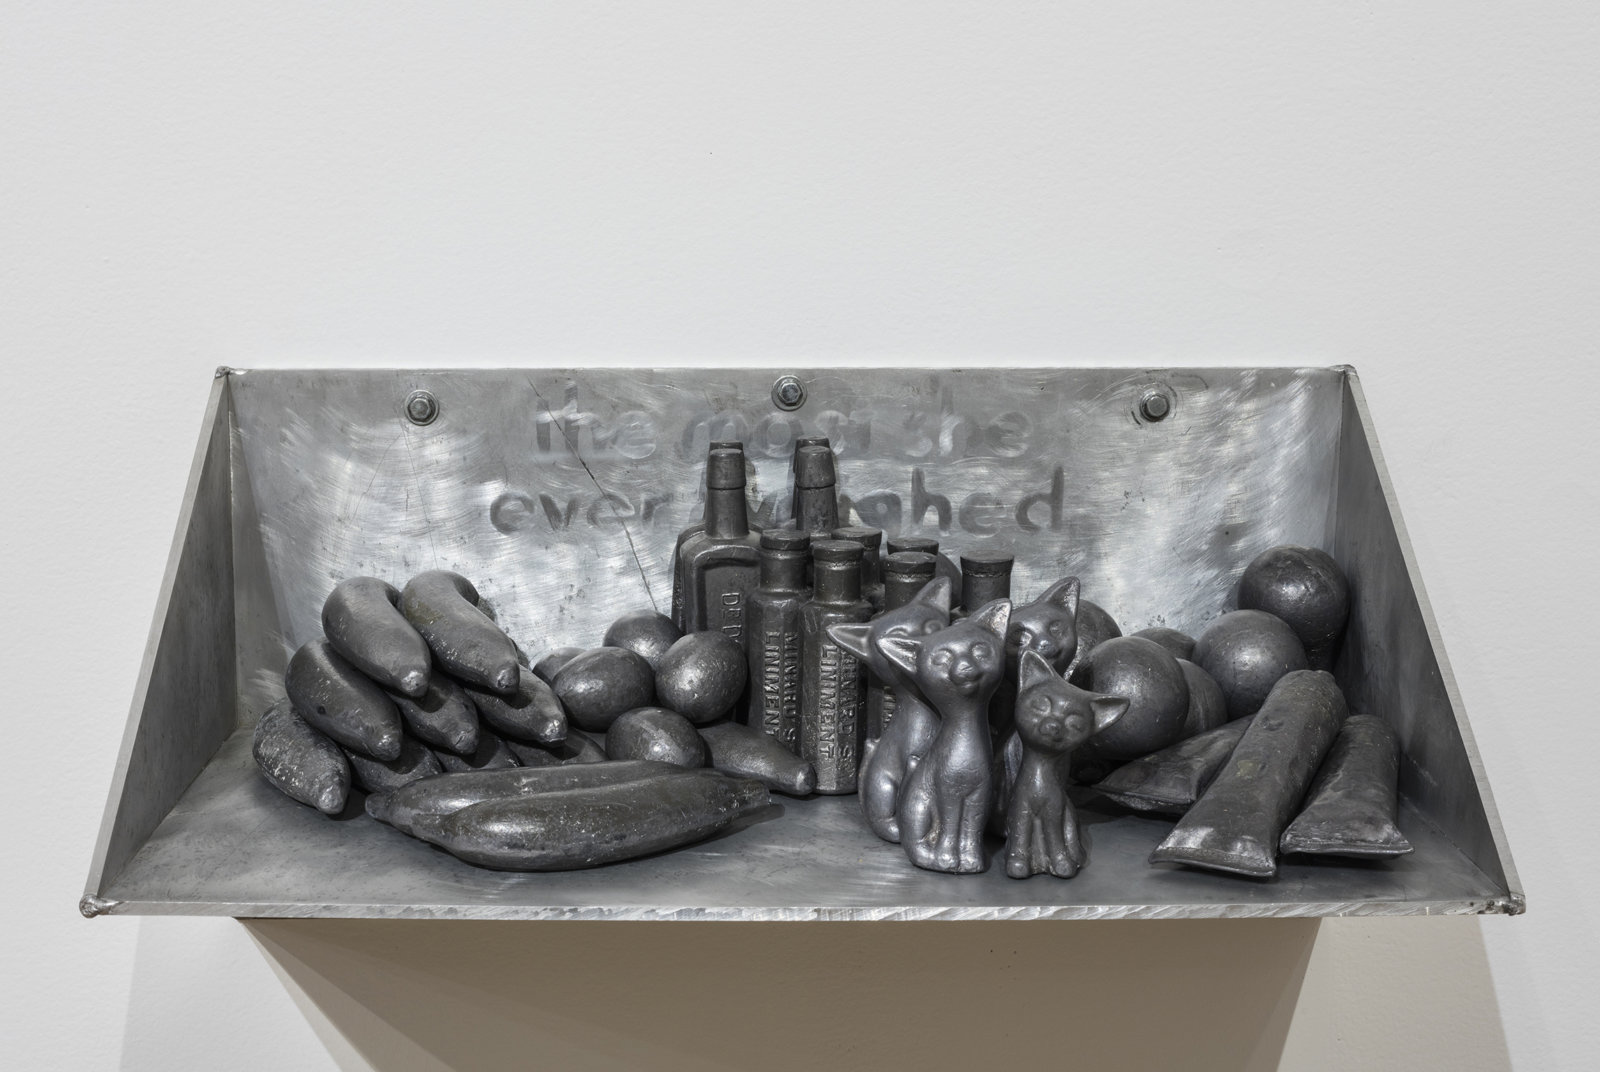 Liz Magor, The Most She Weighed / The Least She Weighed, 1982, lead, aluminum, 15 x 30 x 15 in. (38 x 77 x 38 cm), 12 x 24 x 12 in. (31 x 62 x 31 cm)